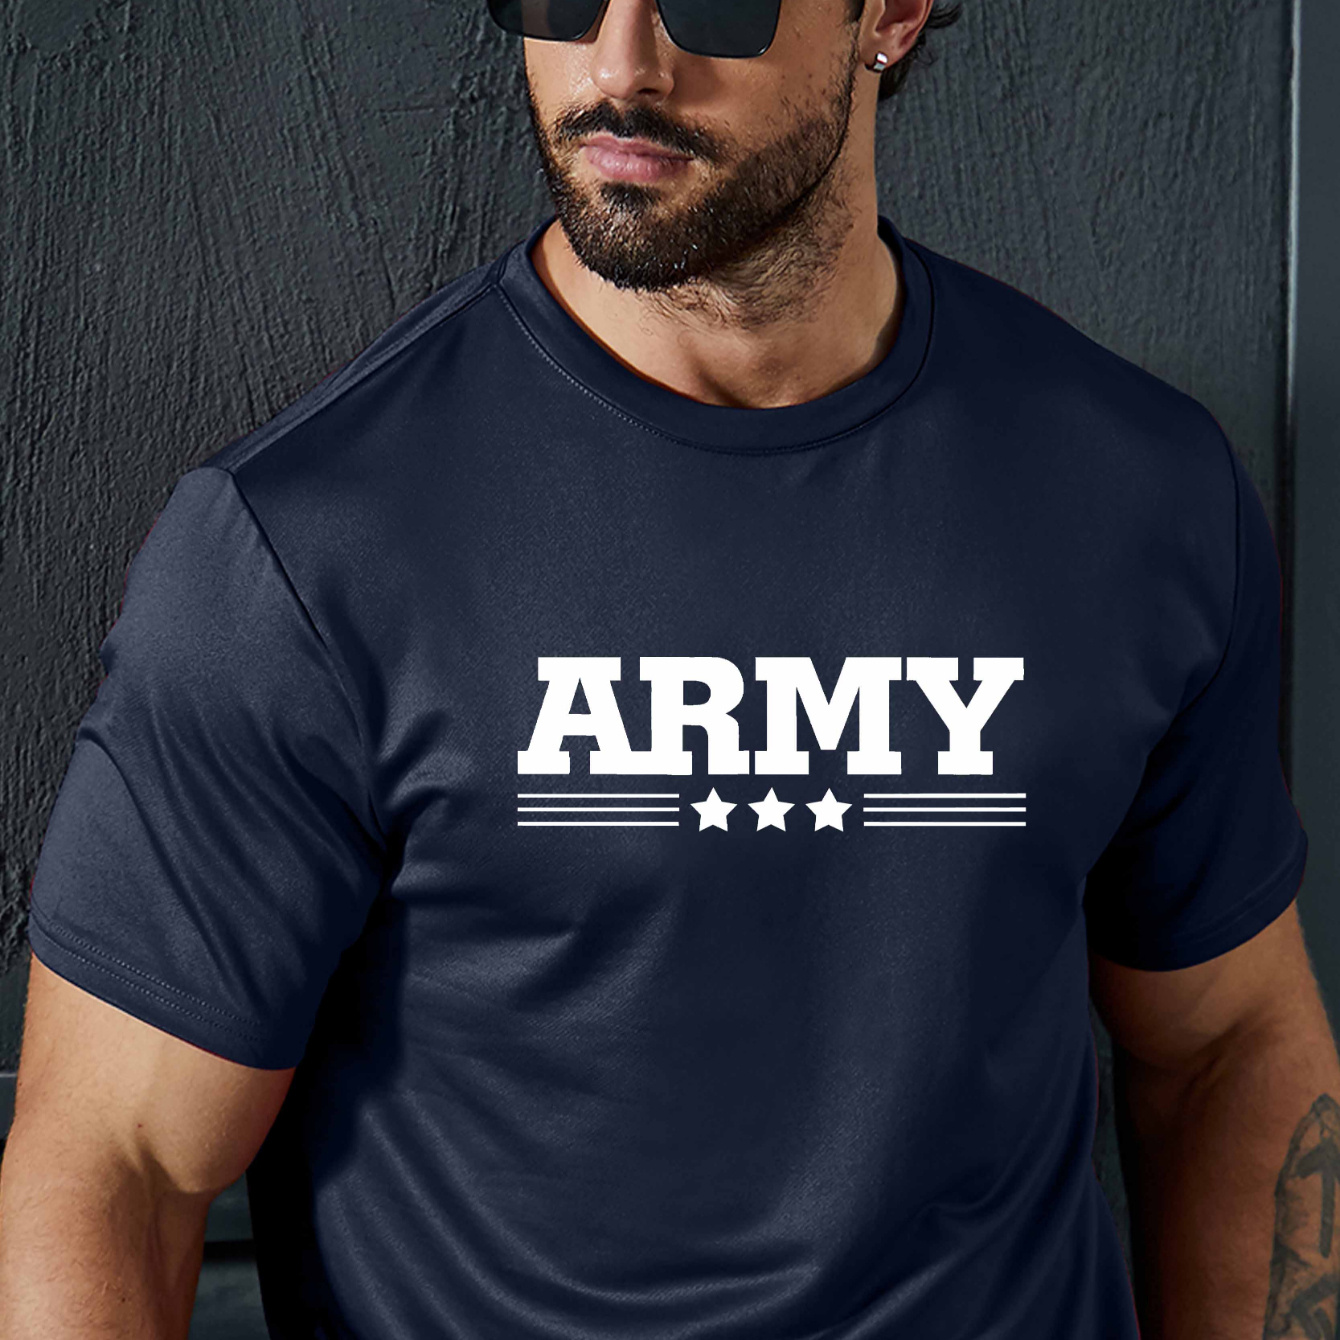 

Simple ' Army ' Alphabet Print Short Sleeve T-shirt For Men, Casual Crew Neck Top, Comfy Summer Clothing For Daily Wear